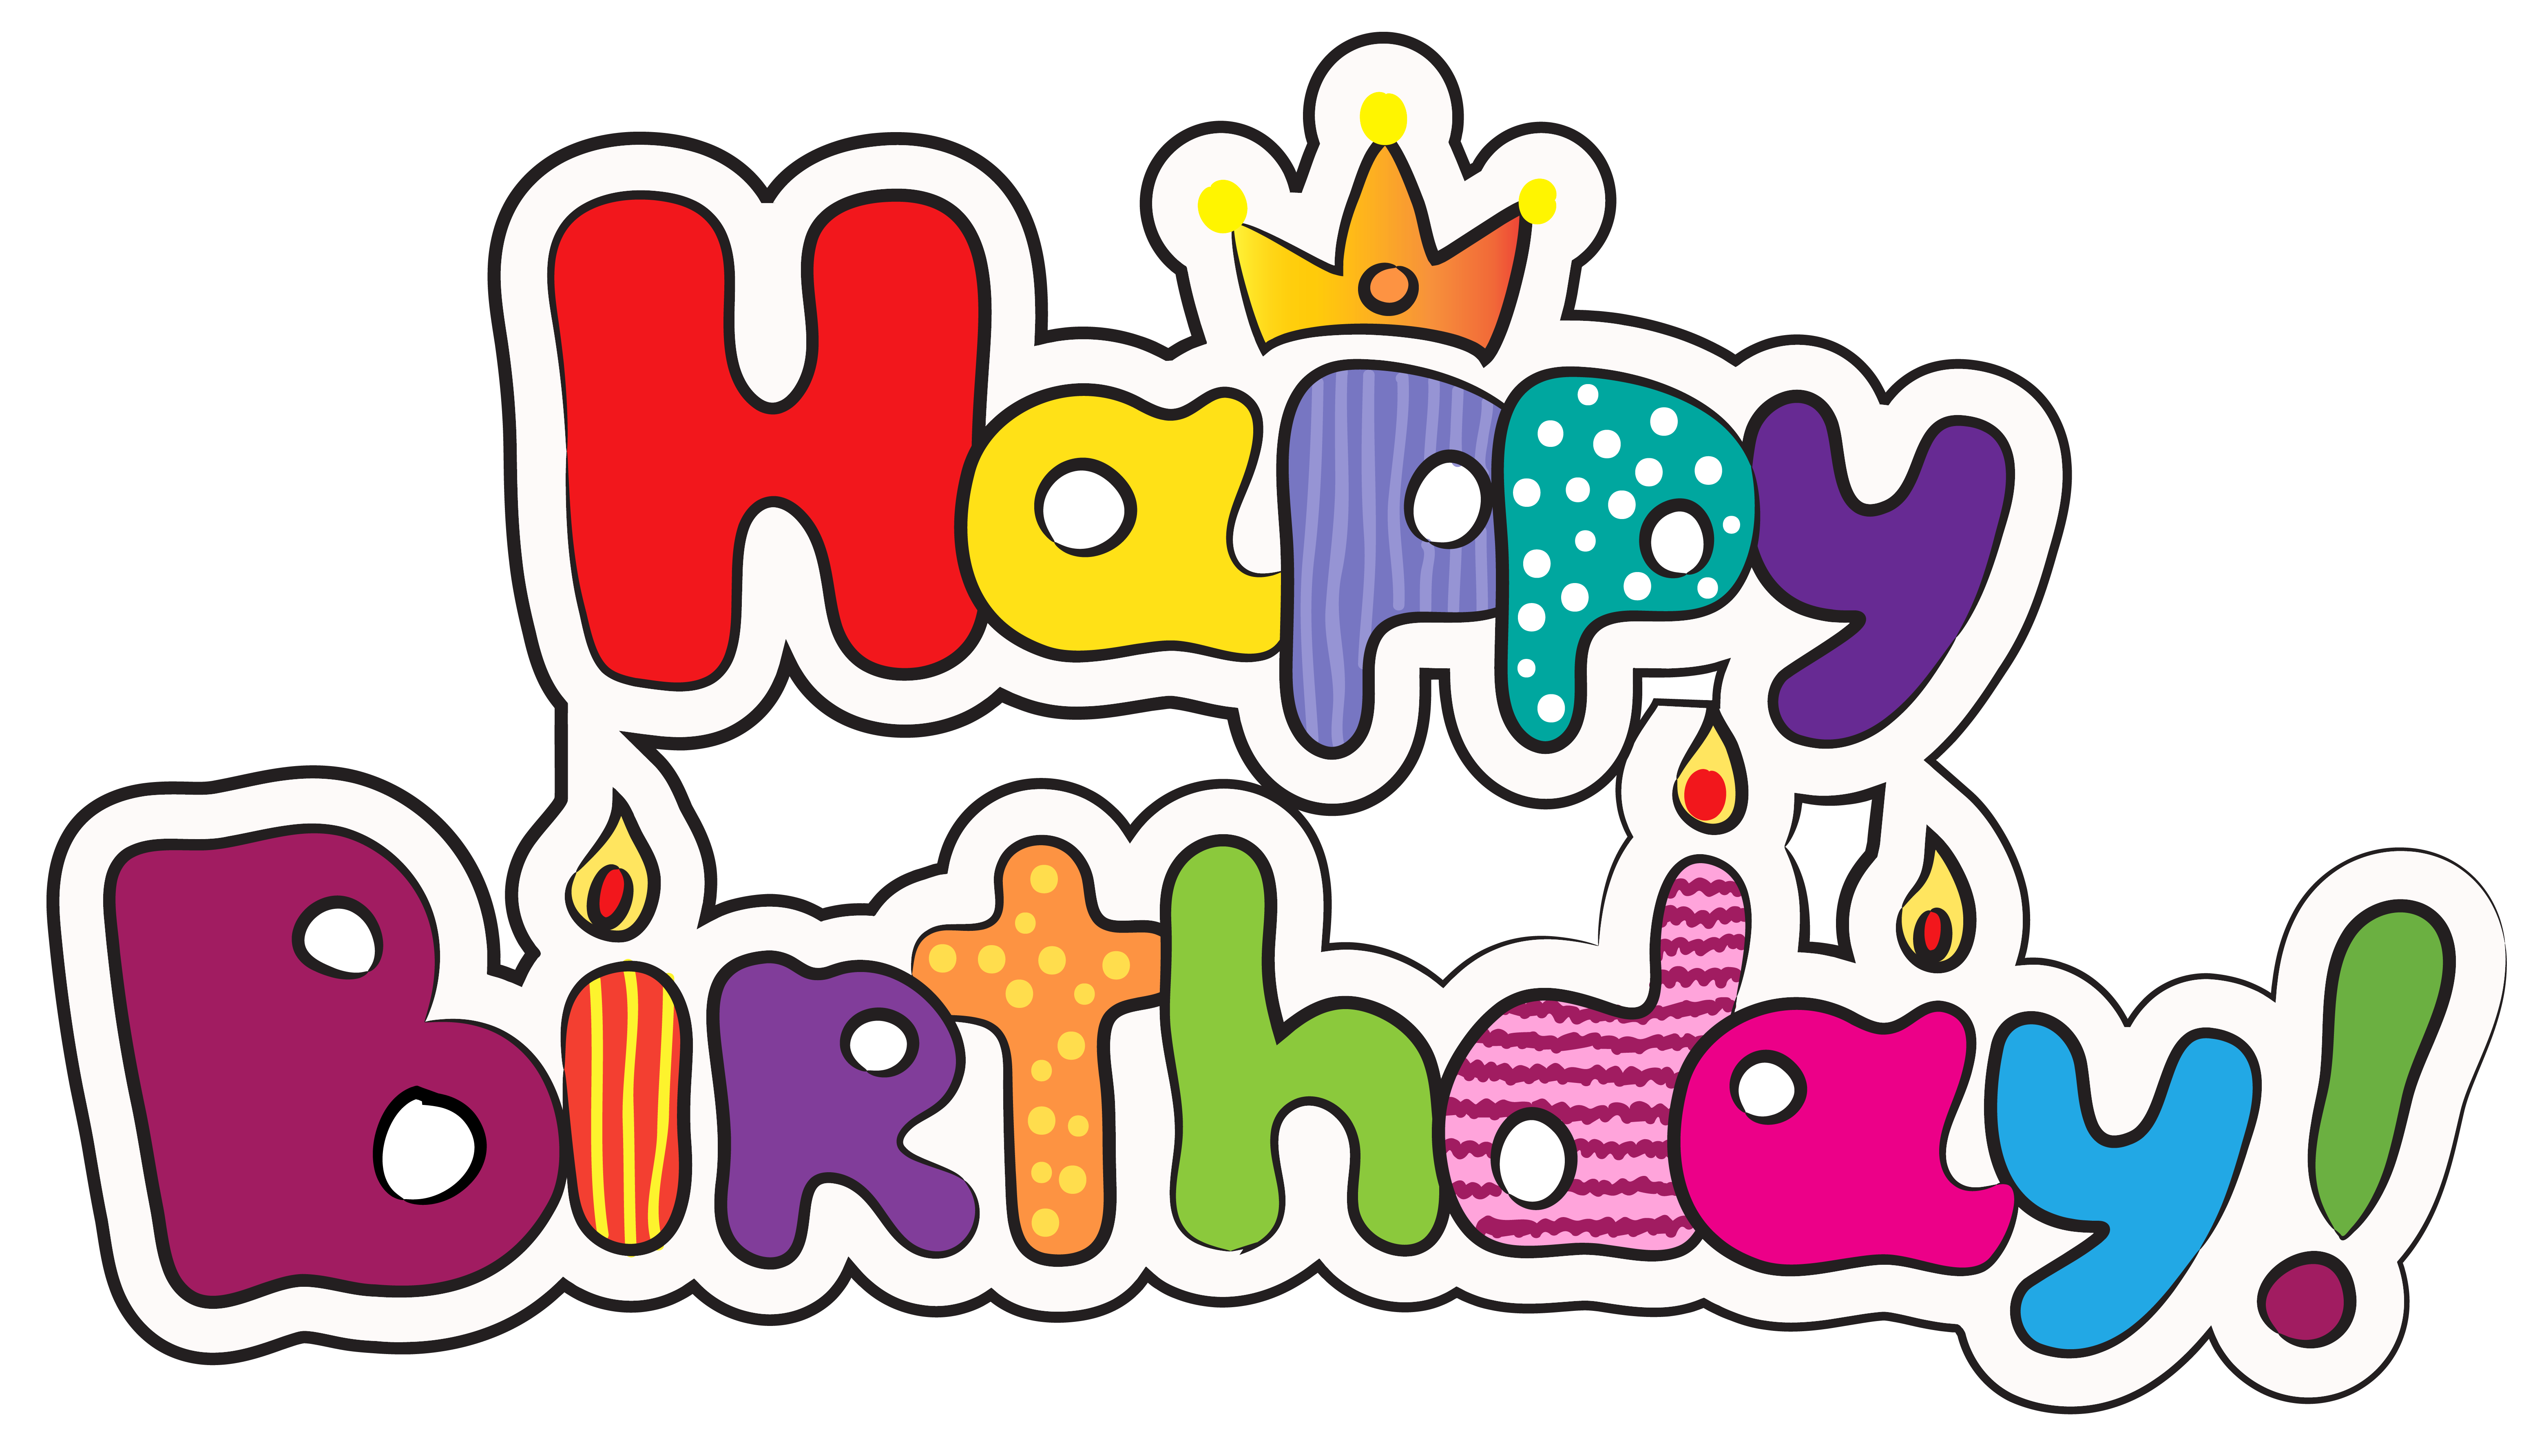 Colorful png image gallery. Words clipart happy birthday